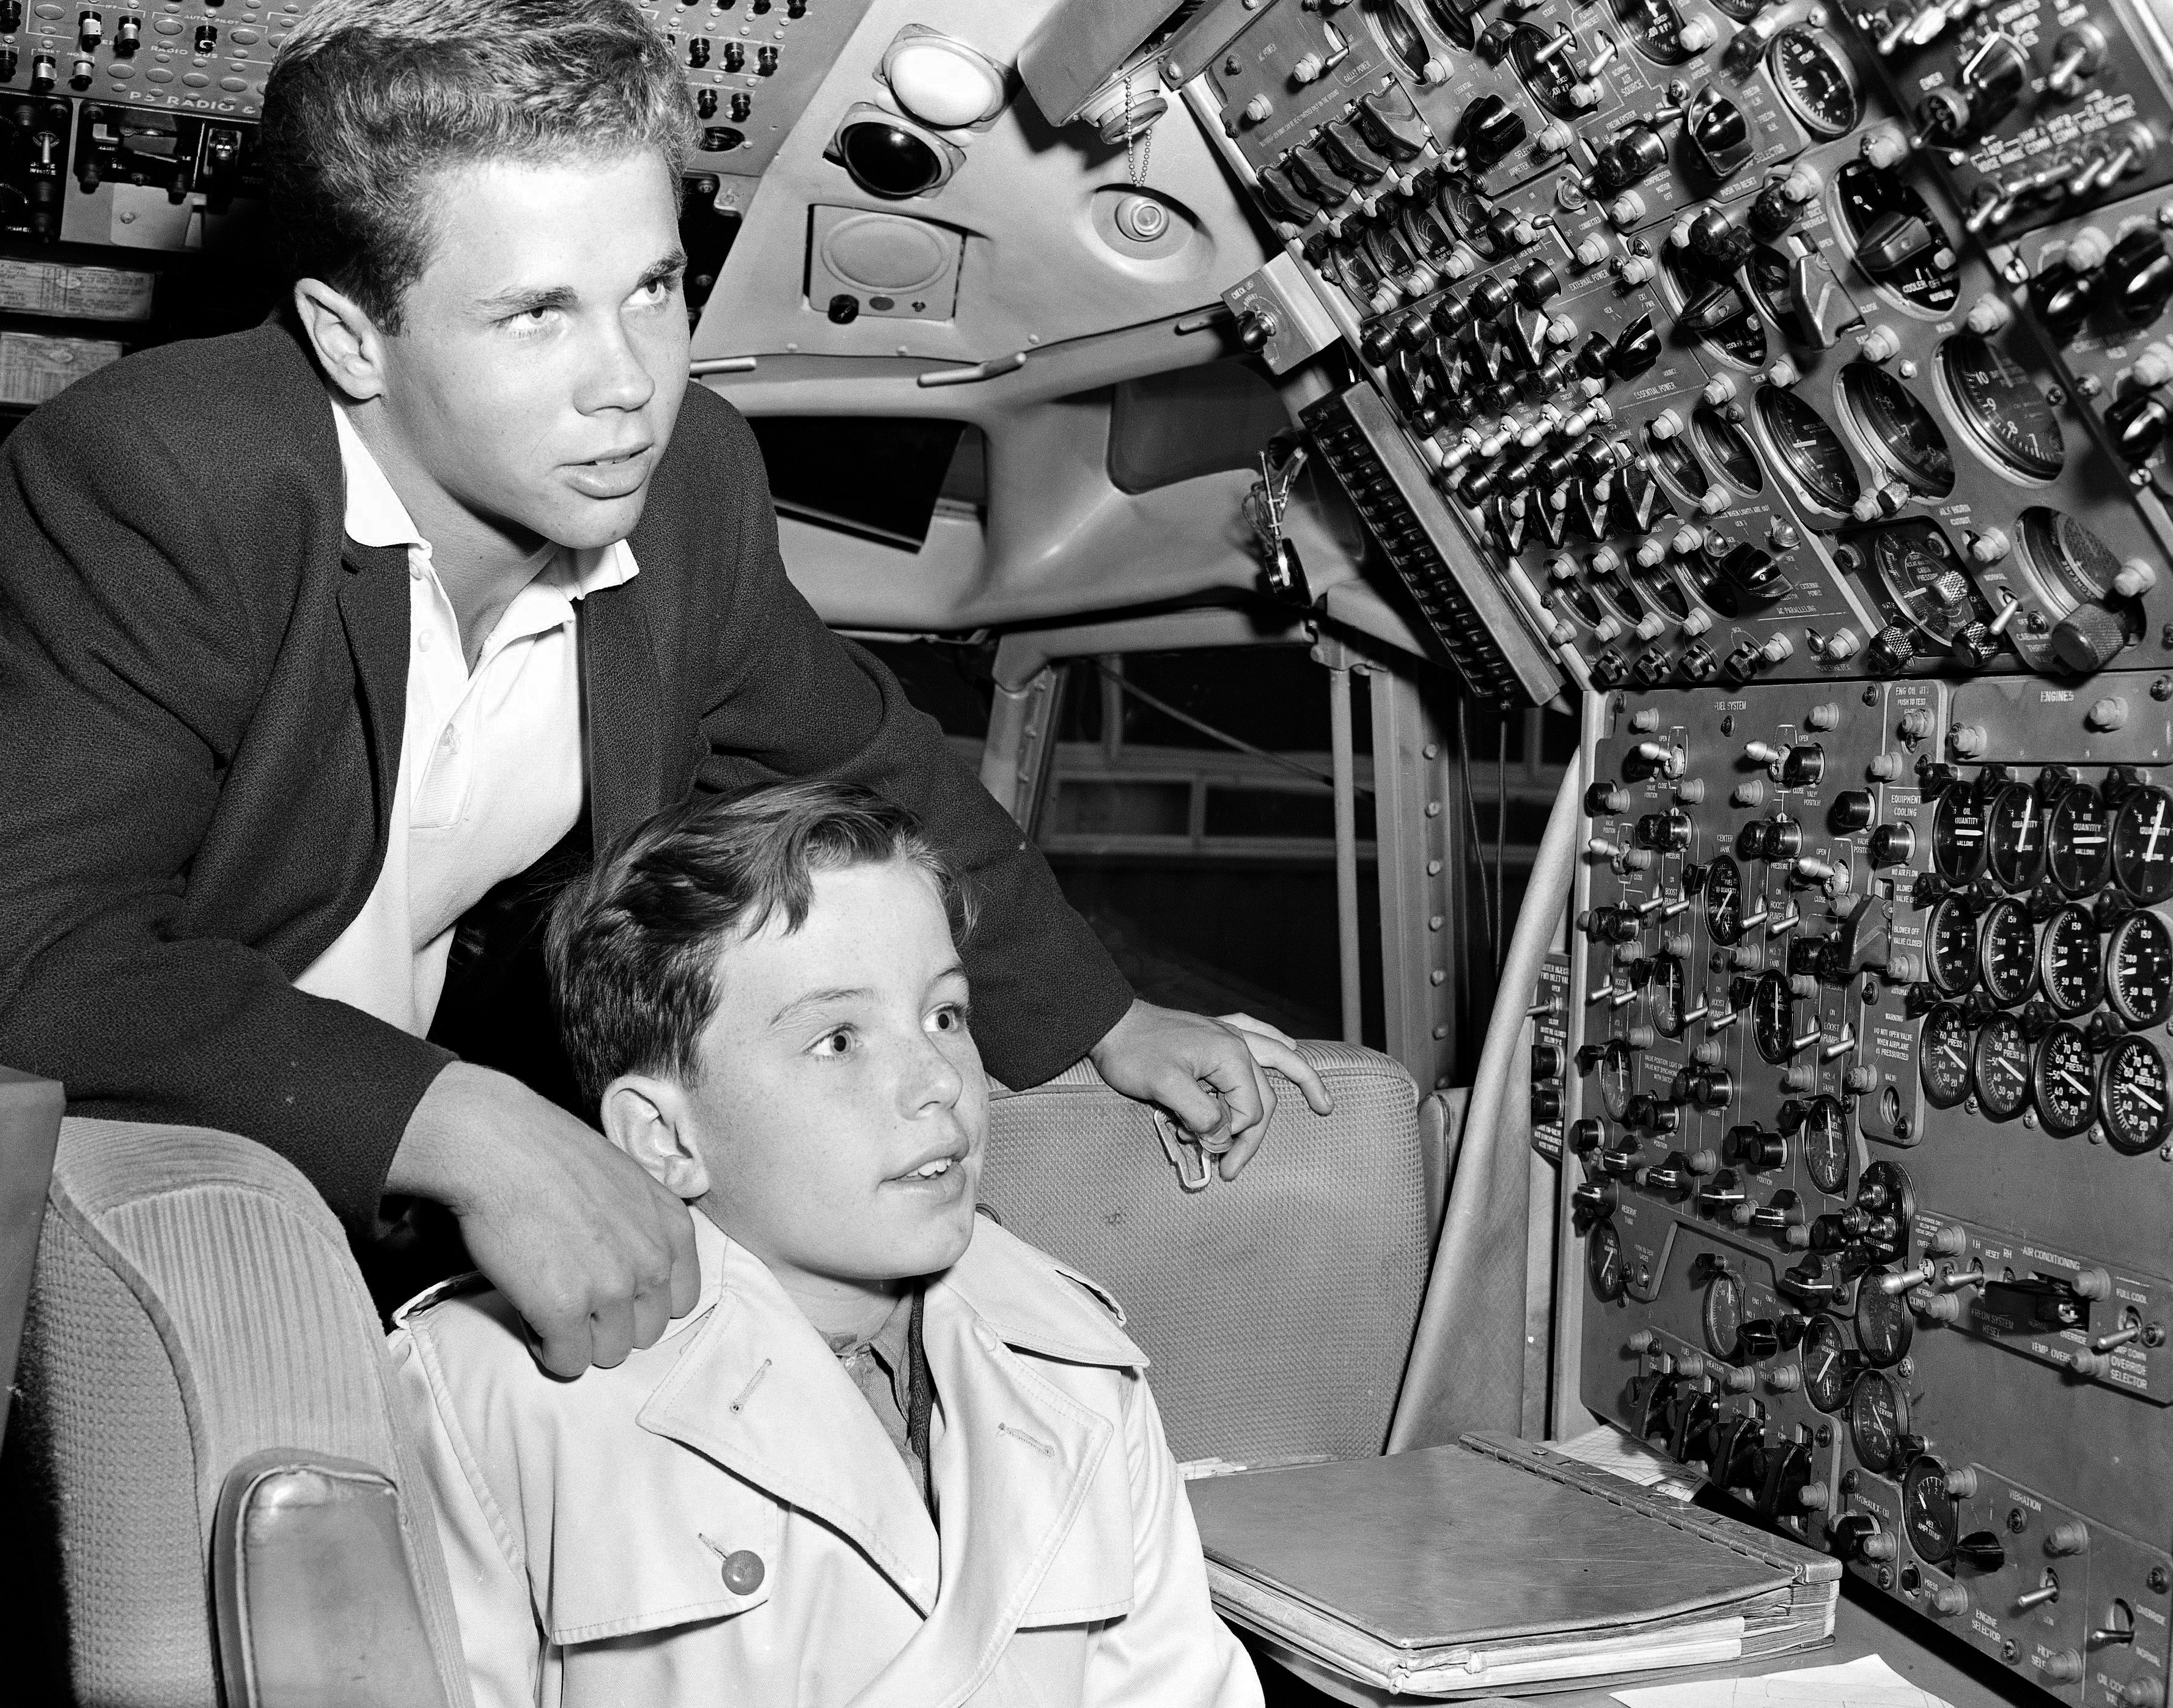 'Leave It to Beaver' actor Tony Dow stands behind co-star Jerry Mathers as he sits in a chair in the cockpit of an airplane